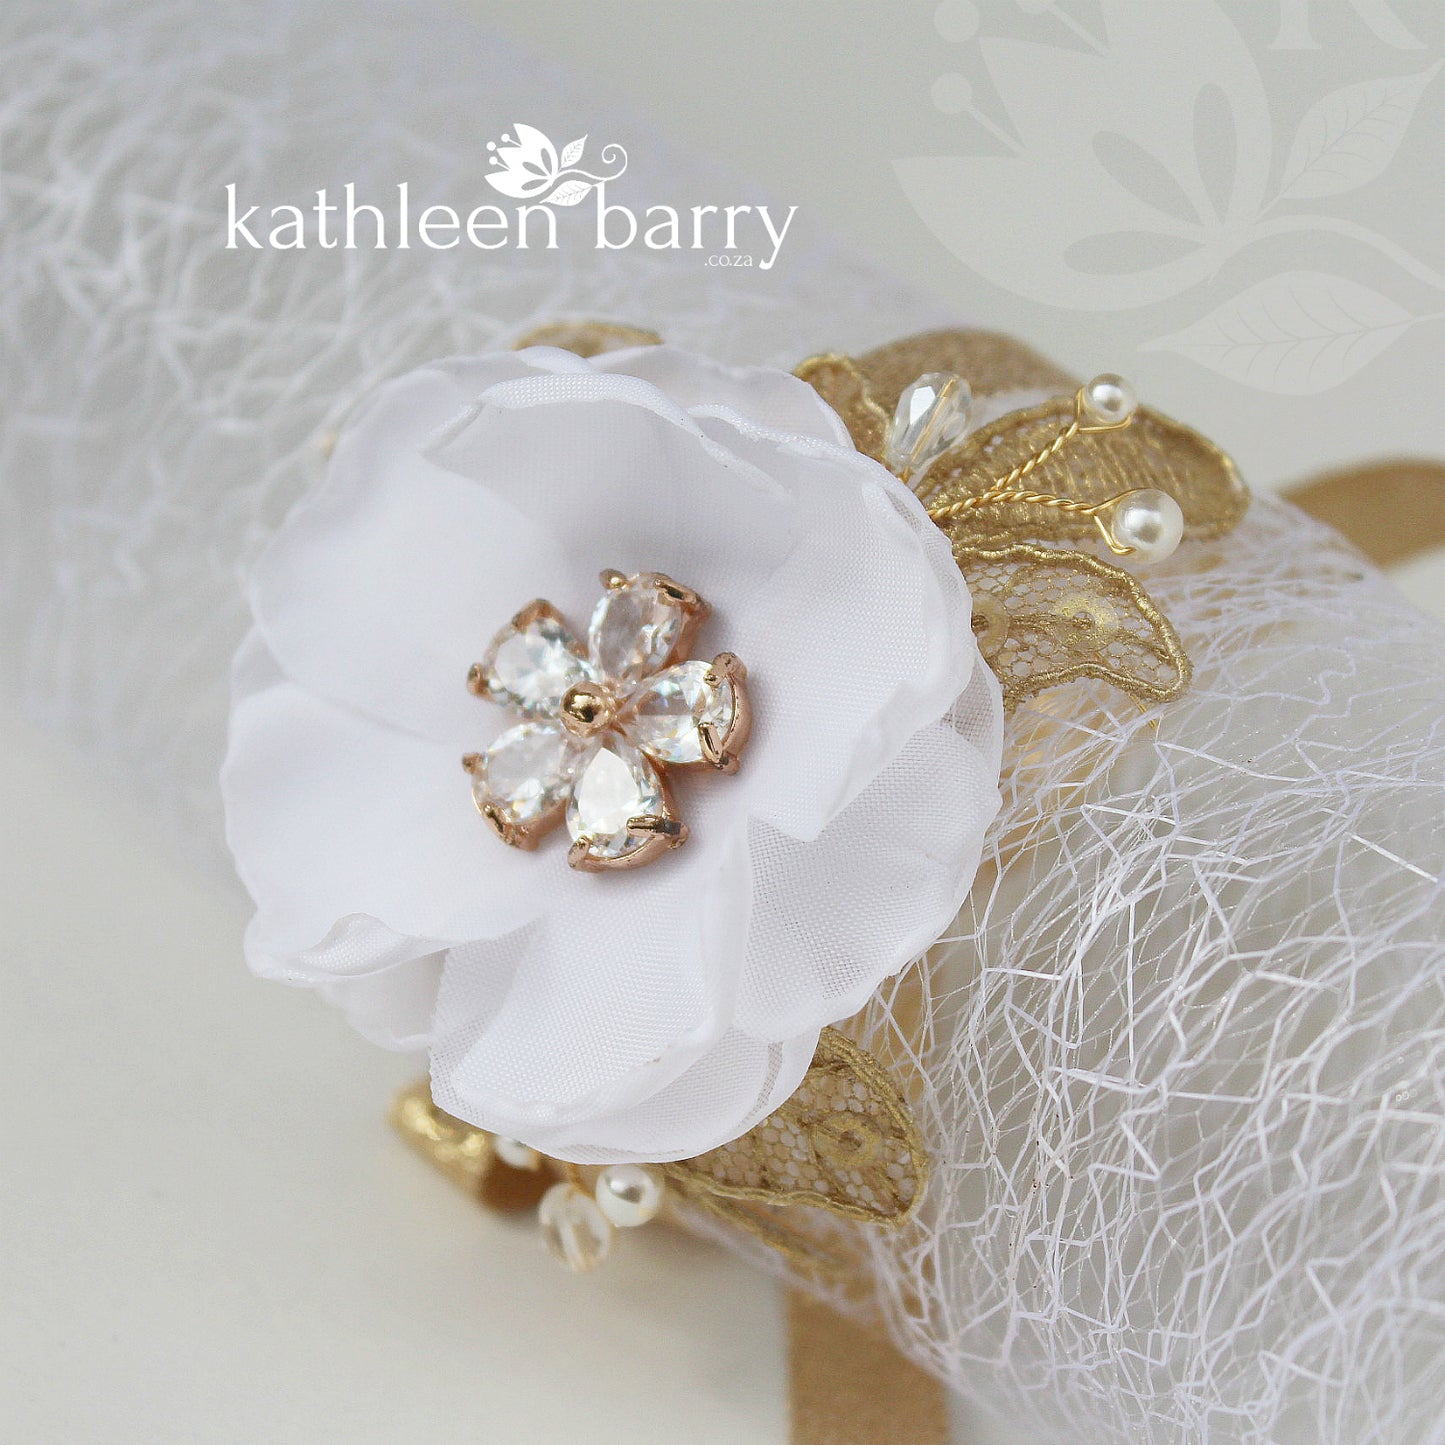 Wrist corsage matric dance prom mother of the bride